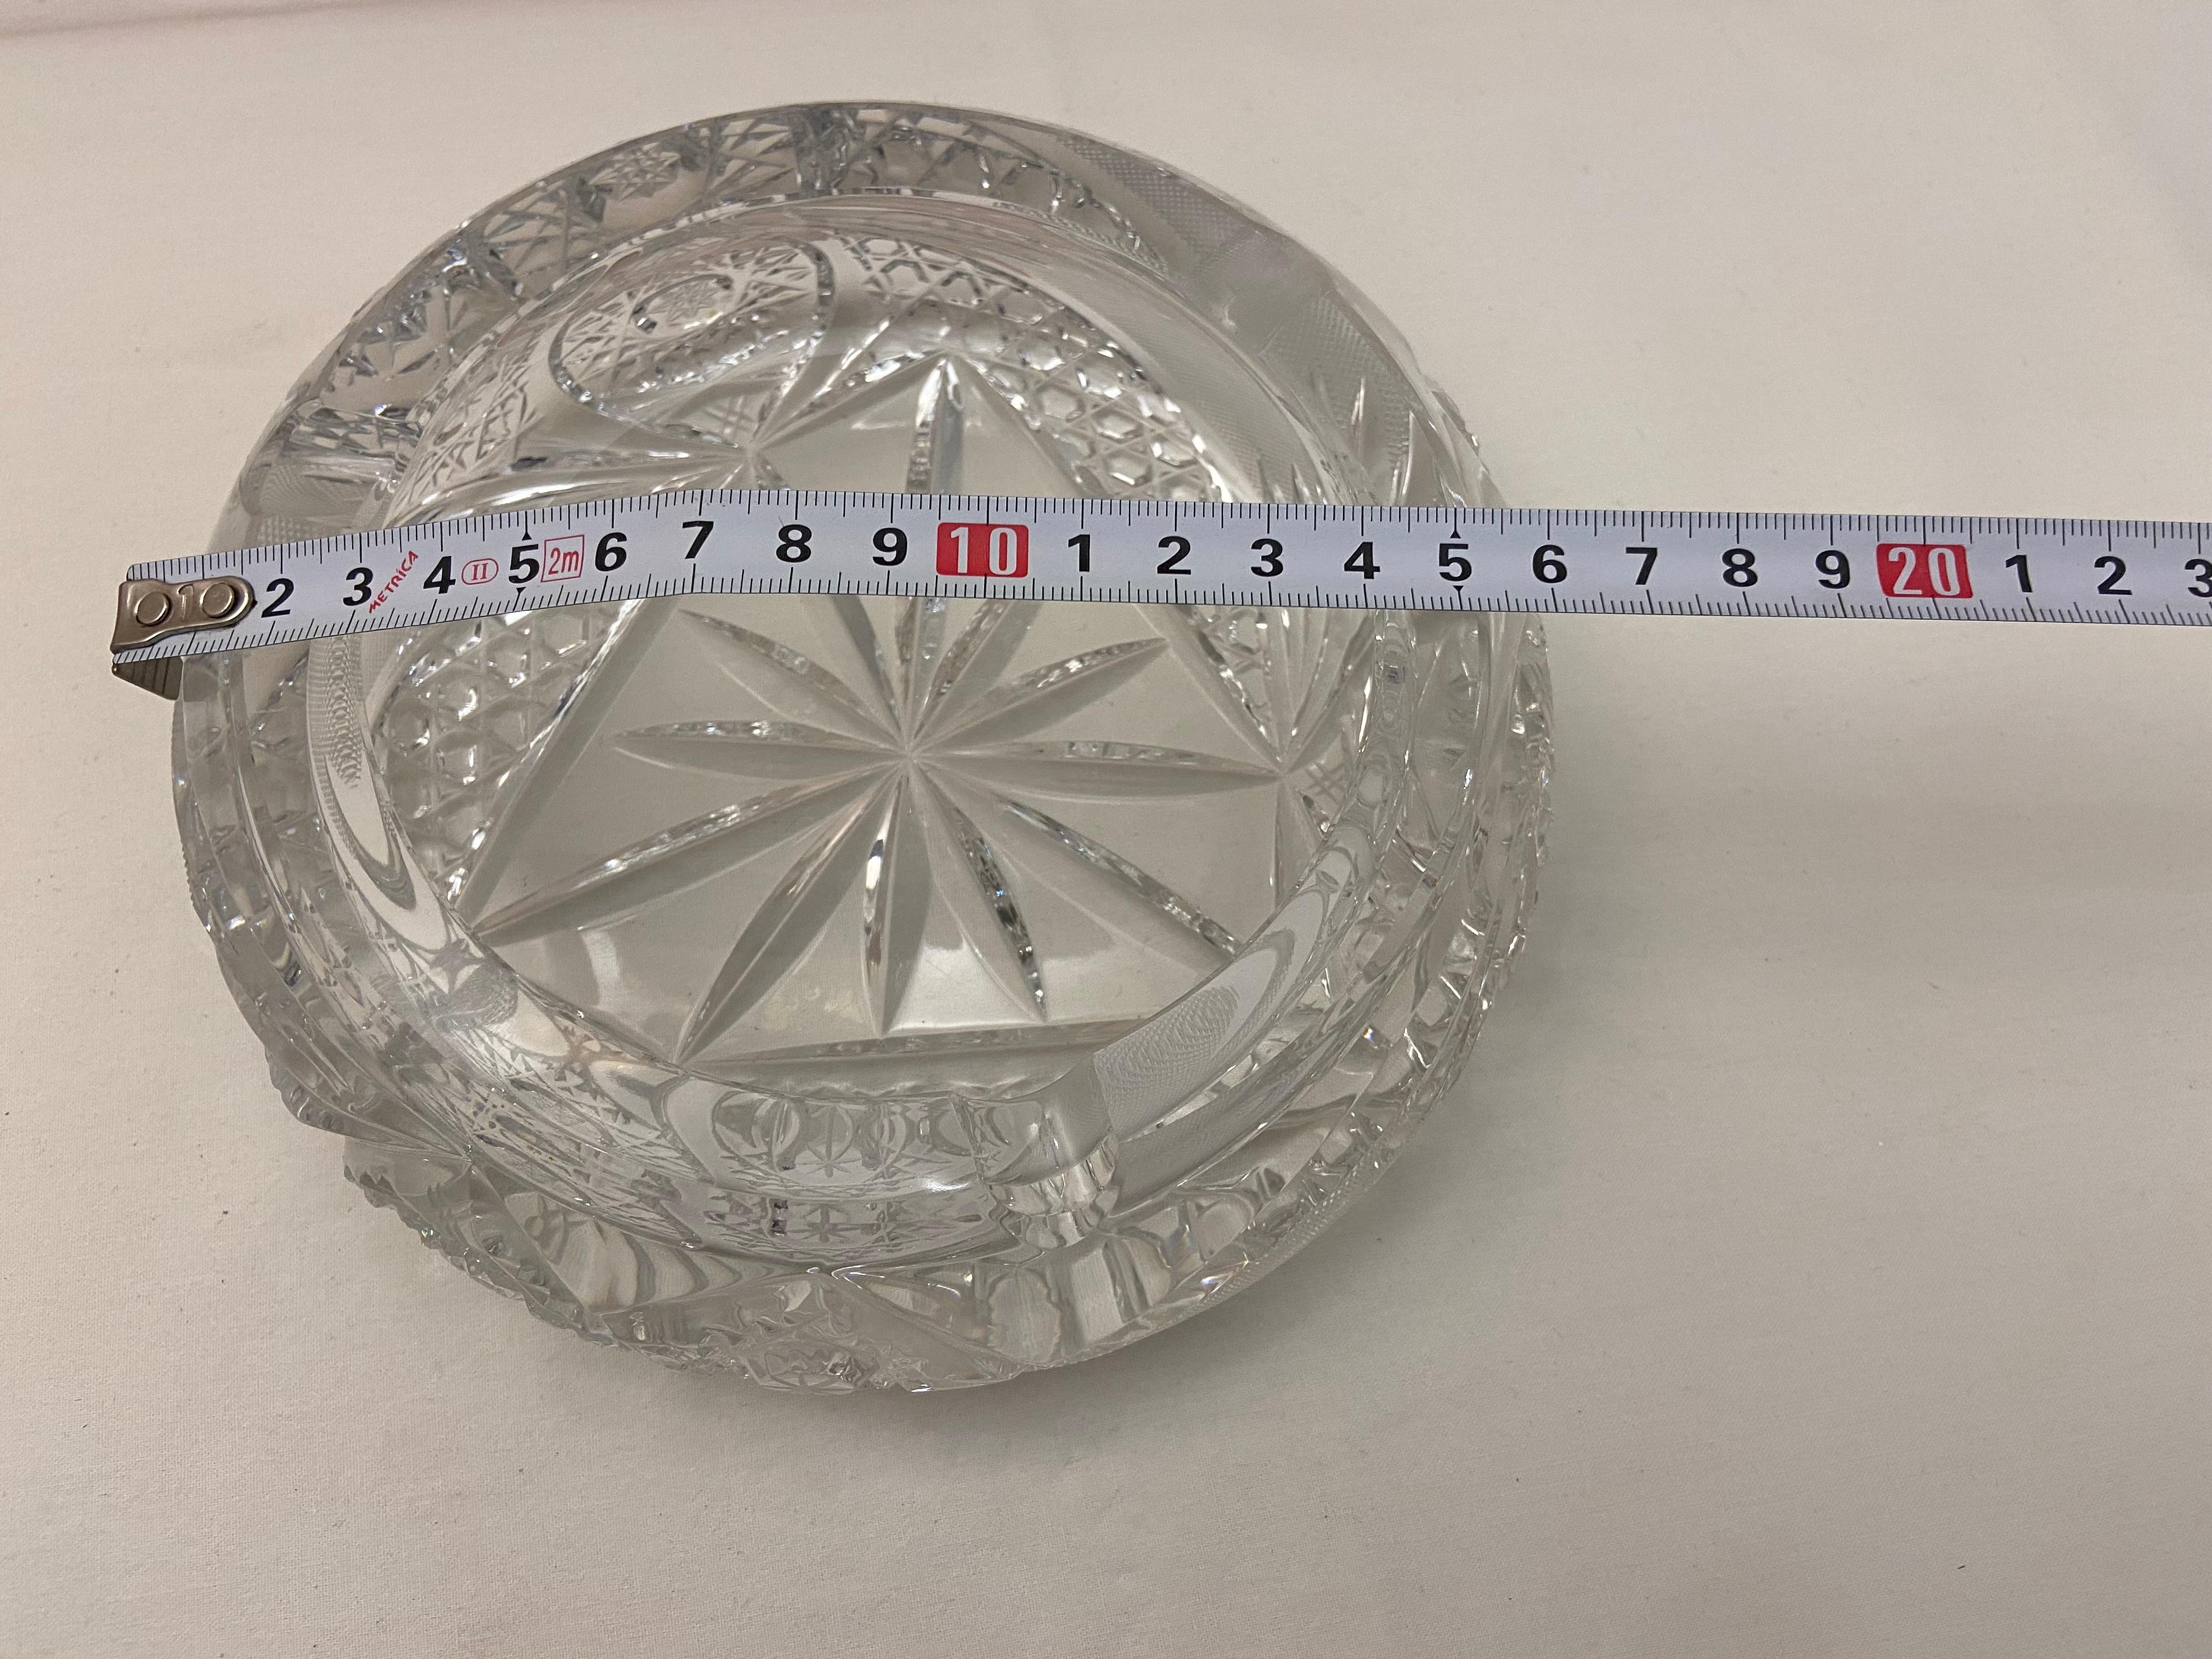 Bohemian crystal is a decorative glass produced, since the thirteenth century, in the regions of Bohemia and Silesia, now part of the Czech Republic.
This Ashtray represents the state of the art of this work. It has a diameter of 16 cm.
It will